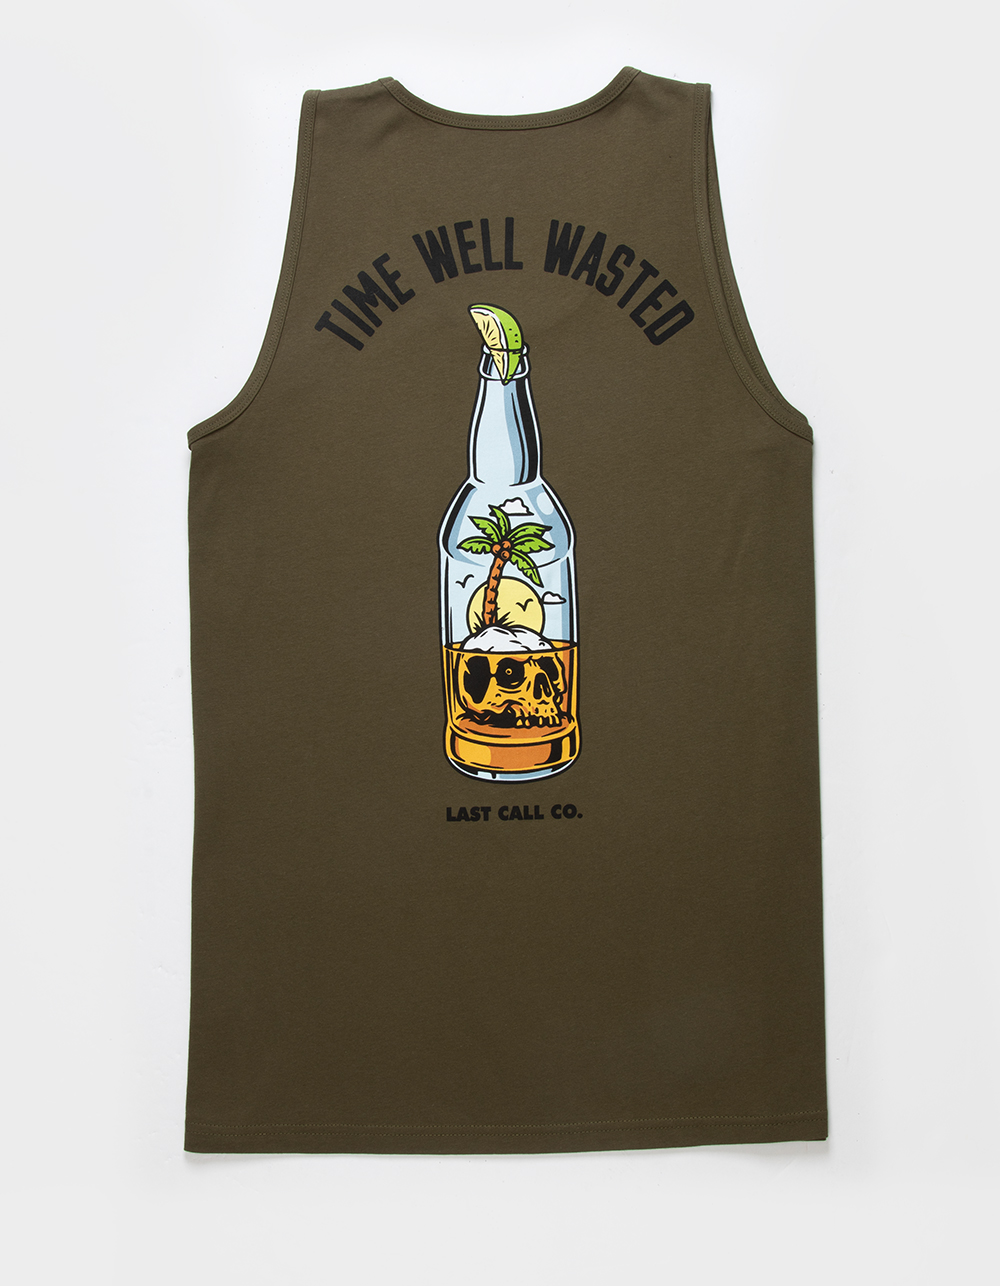 LAST CALL CO. Time Well Wasted Mens Tank Top